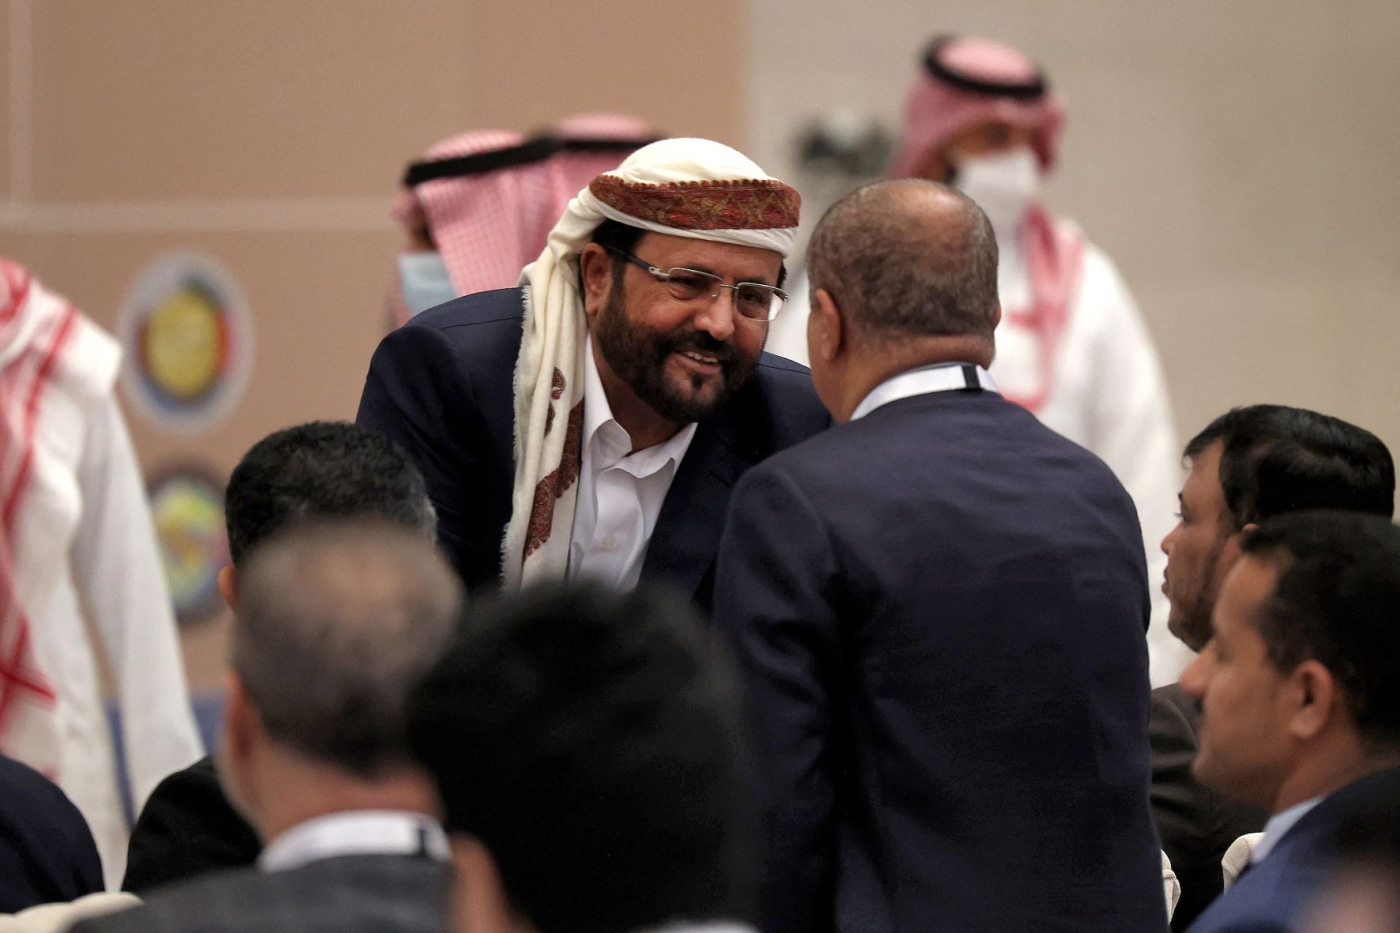 Sultan al-Arada (C) , a member of Yemen's new leadership council, speaks with a person during the last day of the conference on the conflict in Yemen, hosted by the six-nation Gulf Cooperation Council (GCC) in Saudi Arabia's capital Riyadh on April 7, 2022 (AFP)